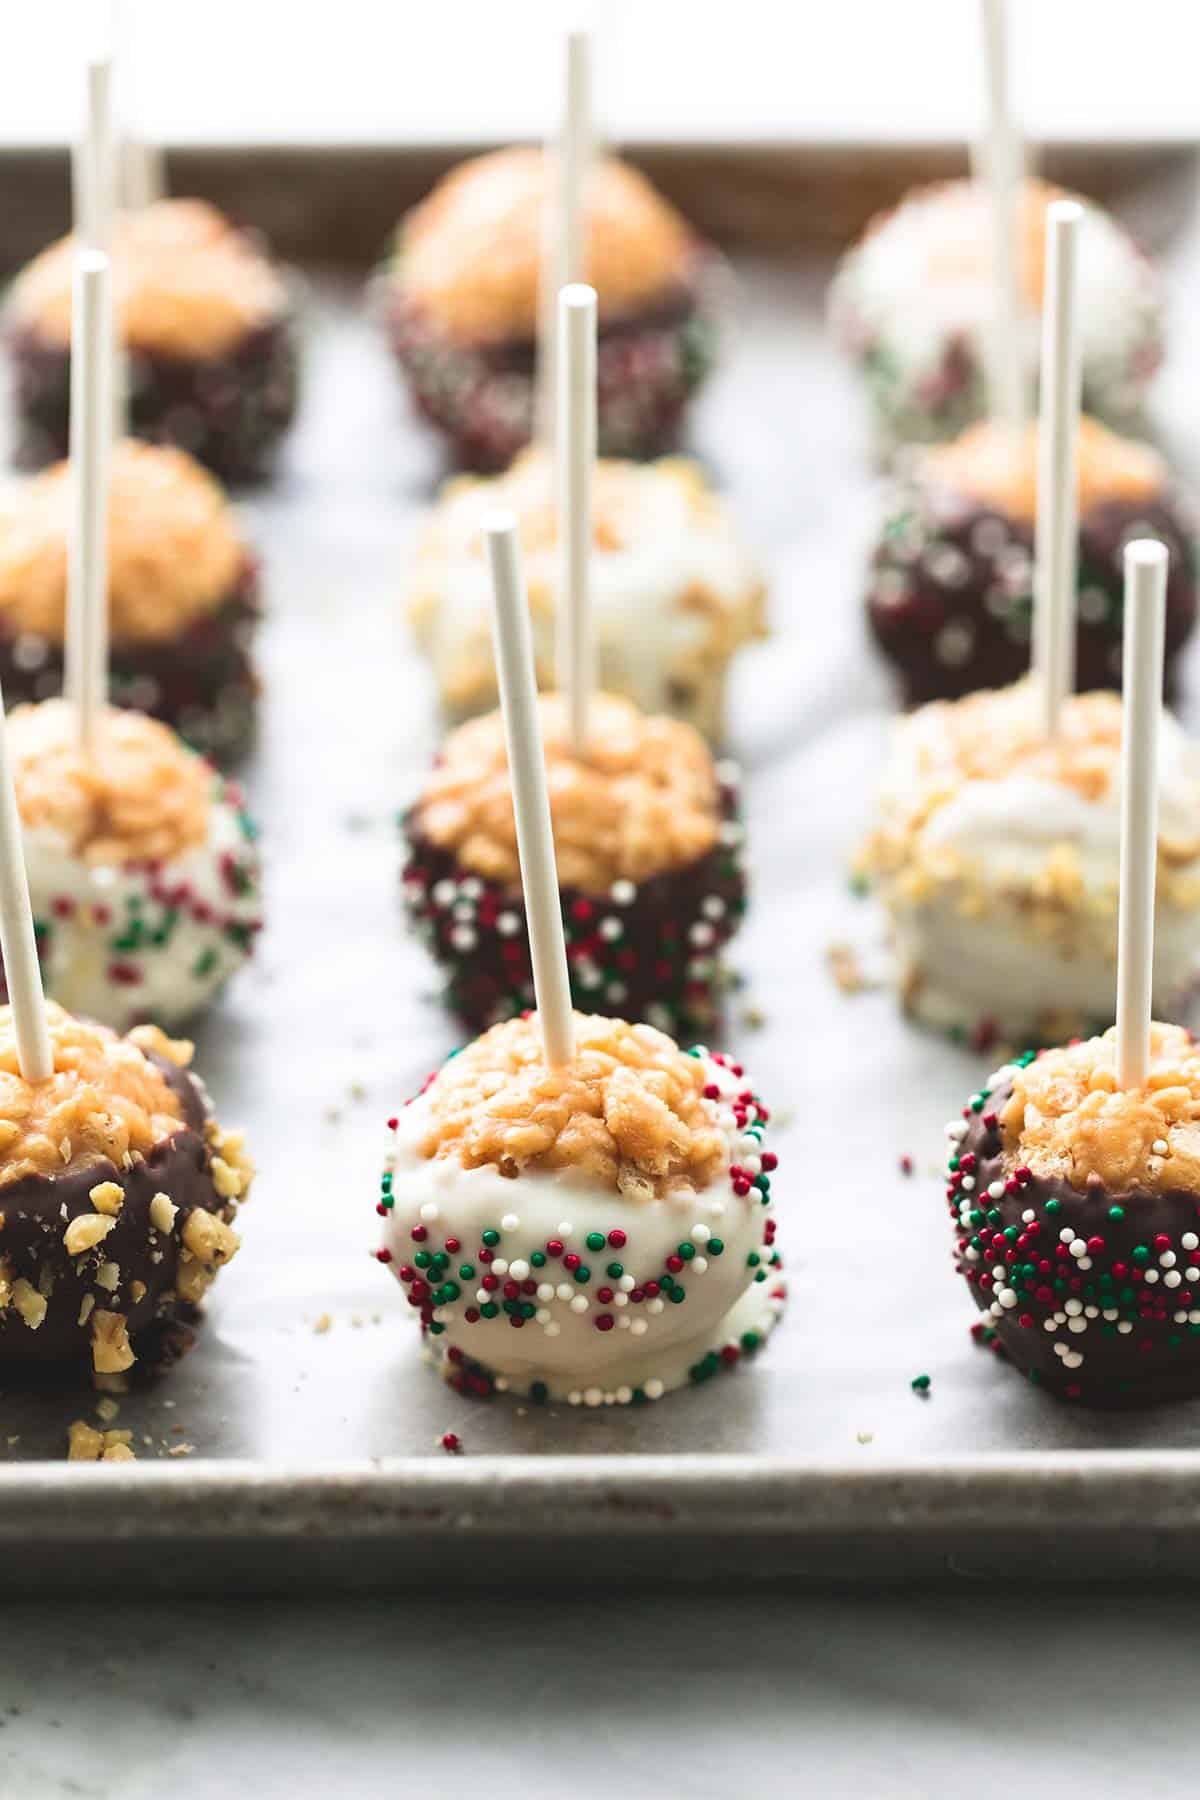 scotcheroos on a stick on a baking sheet with some dipped in white chocolate with sprinkles and milk chocolate with sprinkles.